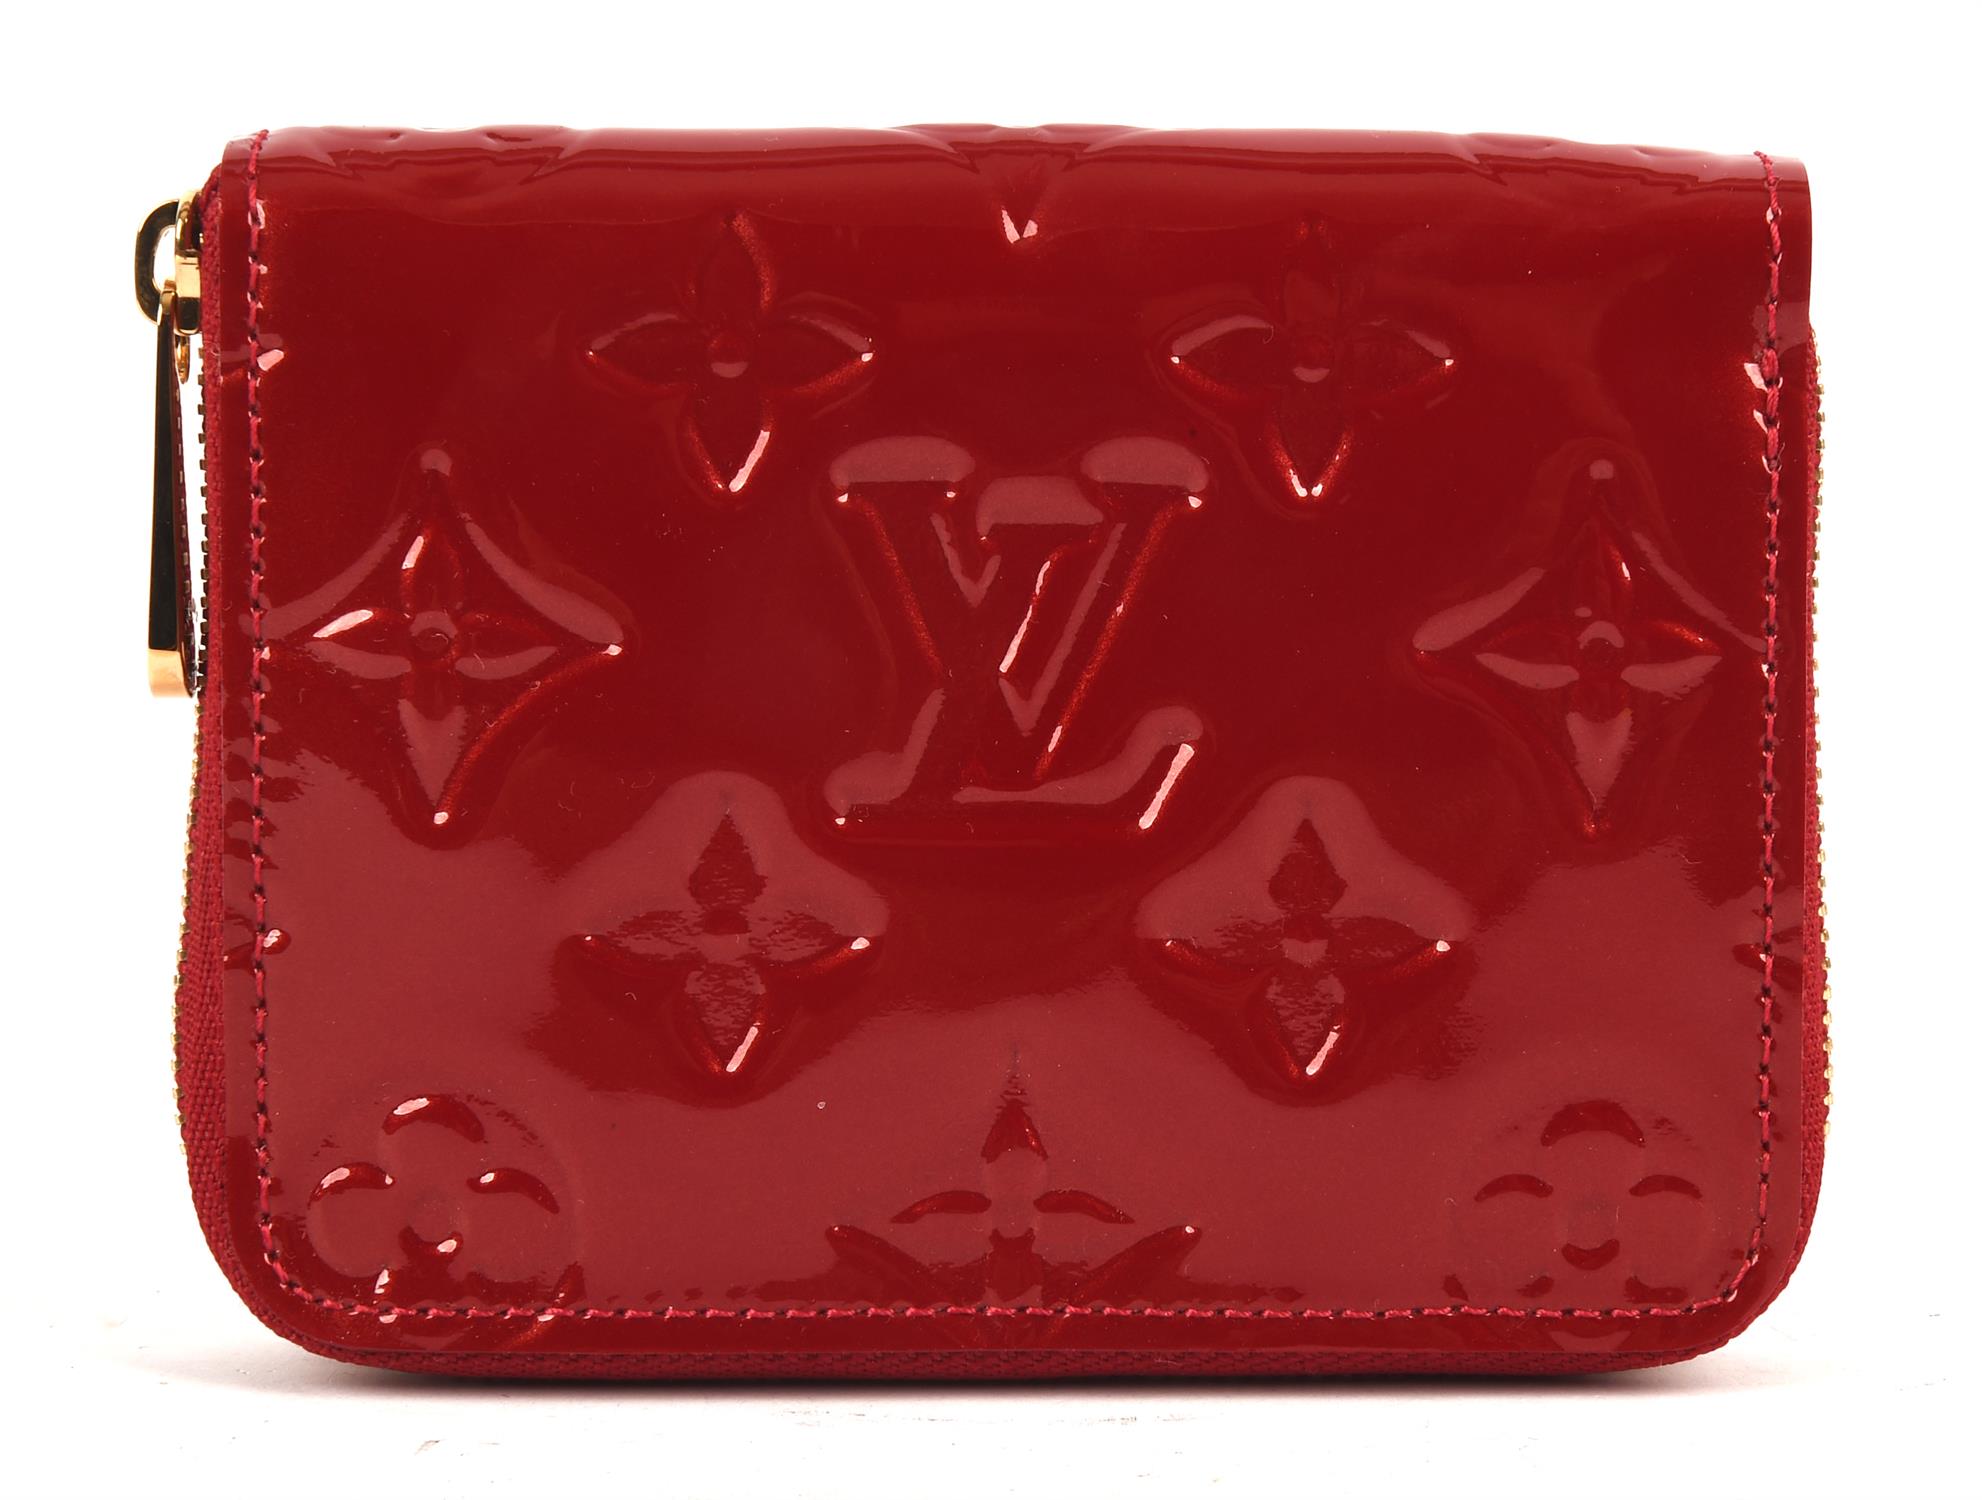 LOUIS VUITTON lipstick red Vernis varnished leather zipped purse in dust cover - Image 2 of 3